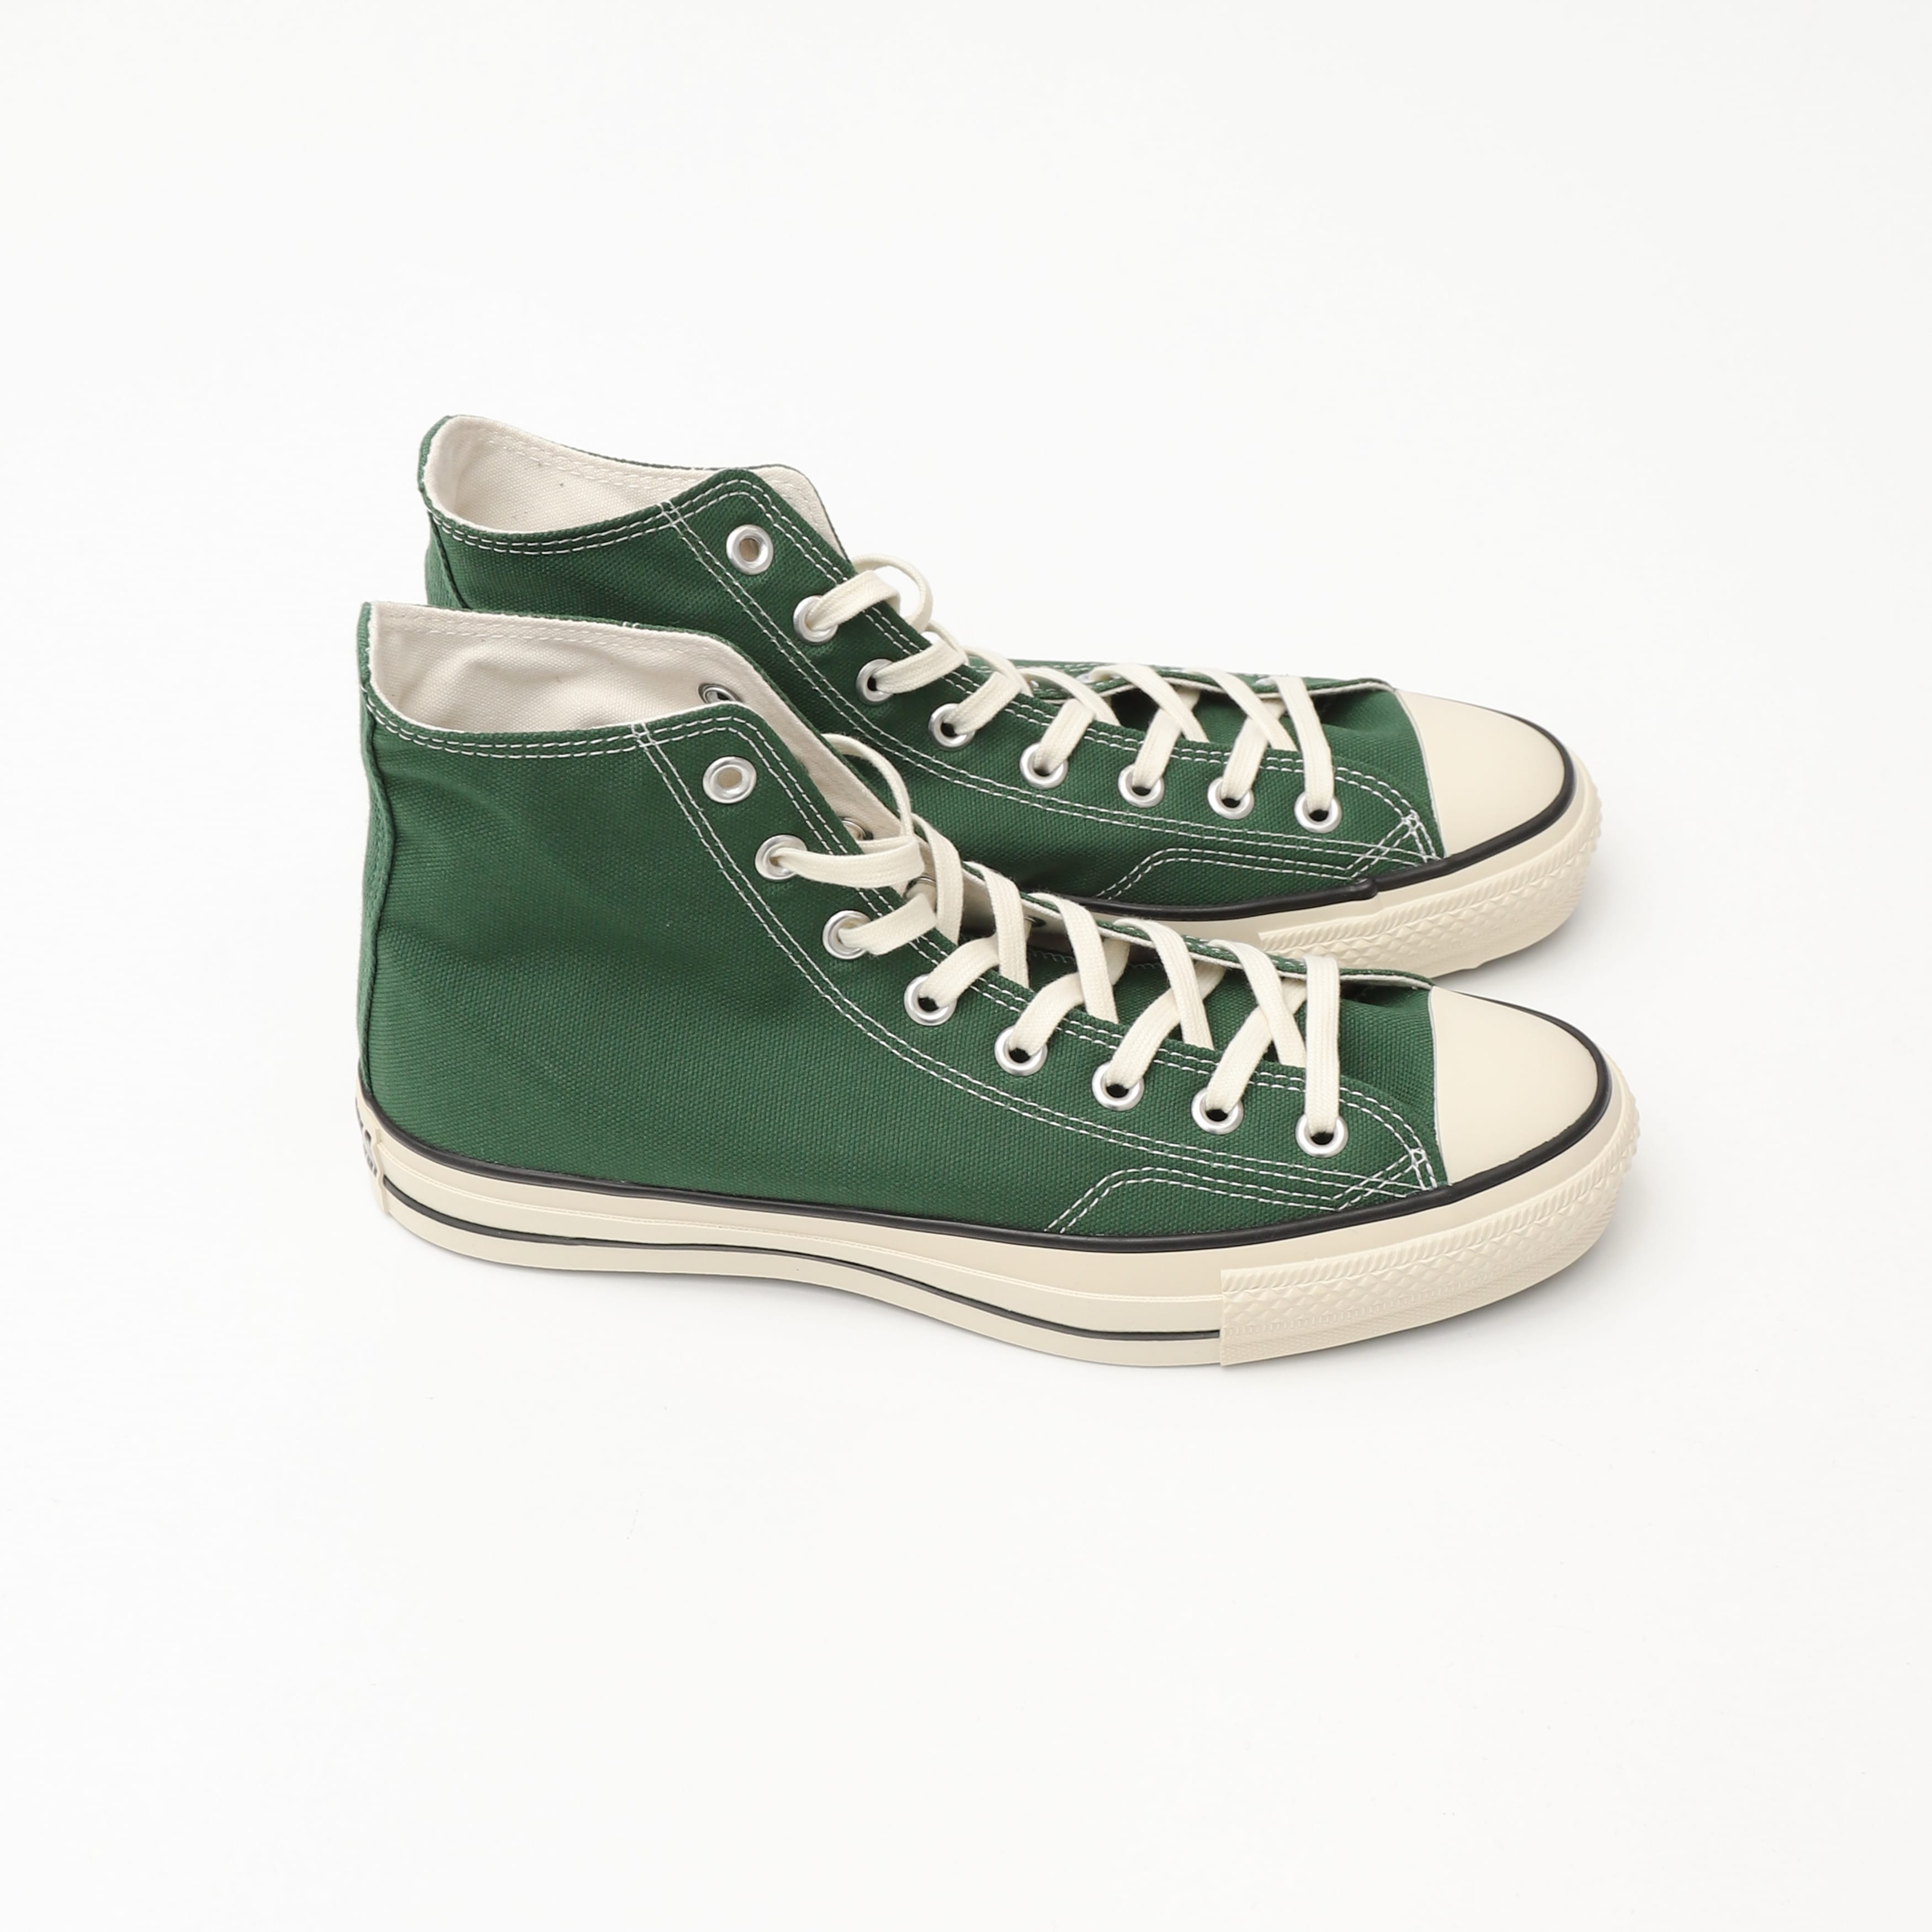 CANVAS ALL STAR J 80s HI – TIME AFTER TIME